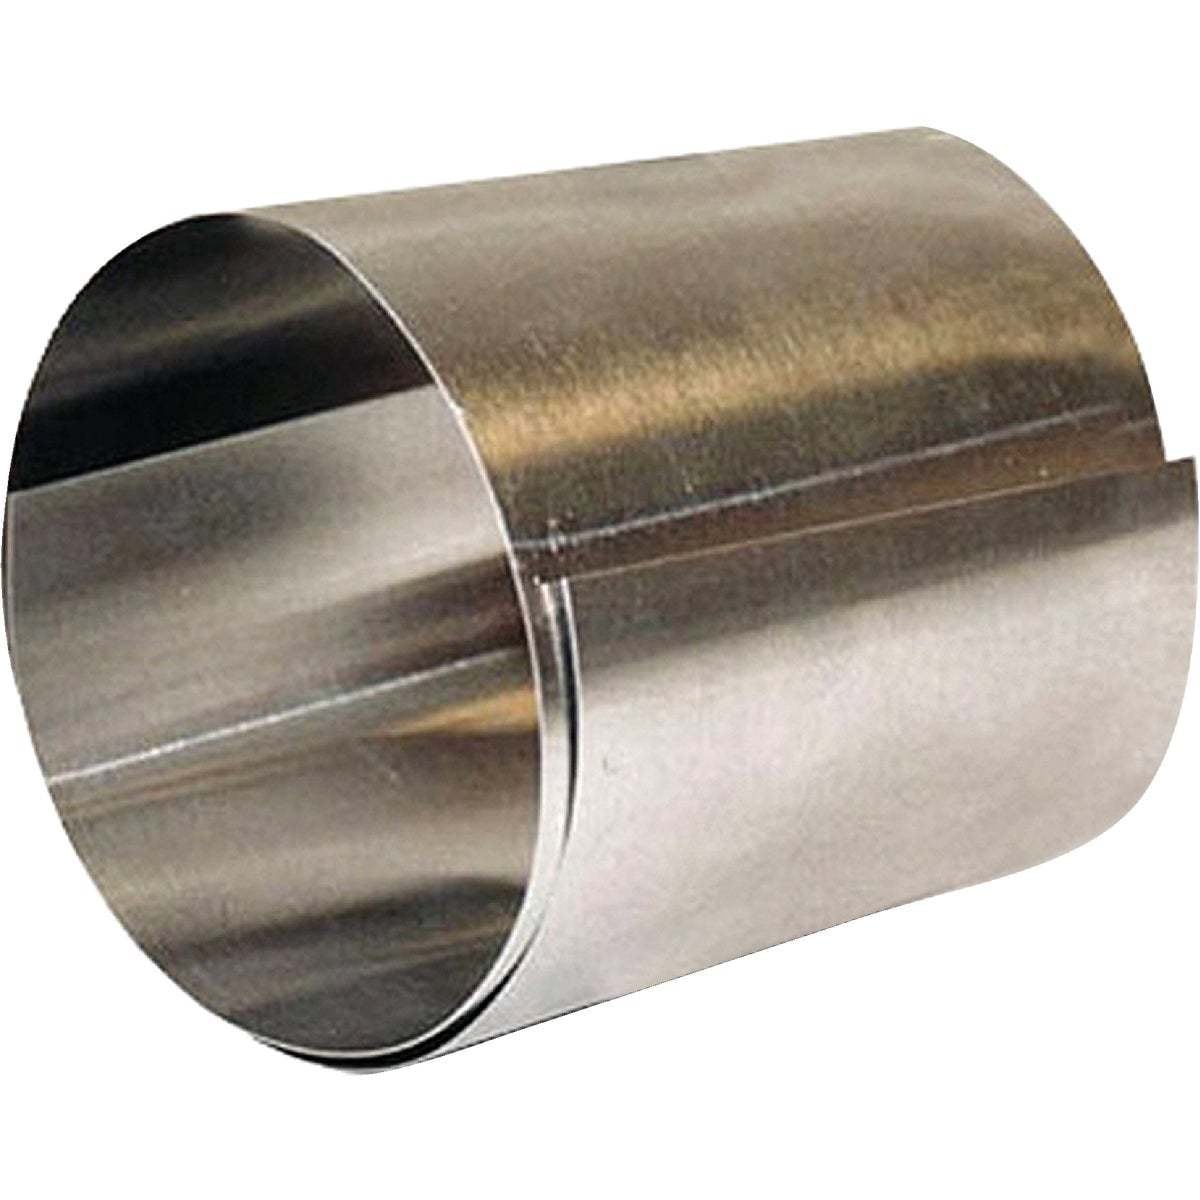 Dundas Jafine 4-1/2 In. Aluminum Universal Duct Connector - 1 Each - 4-1/2 In.